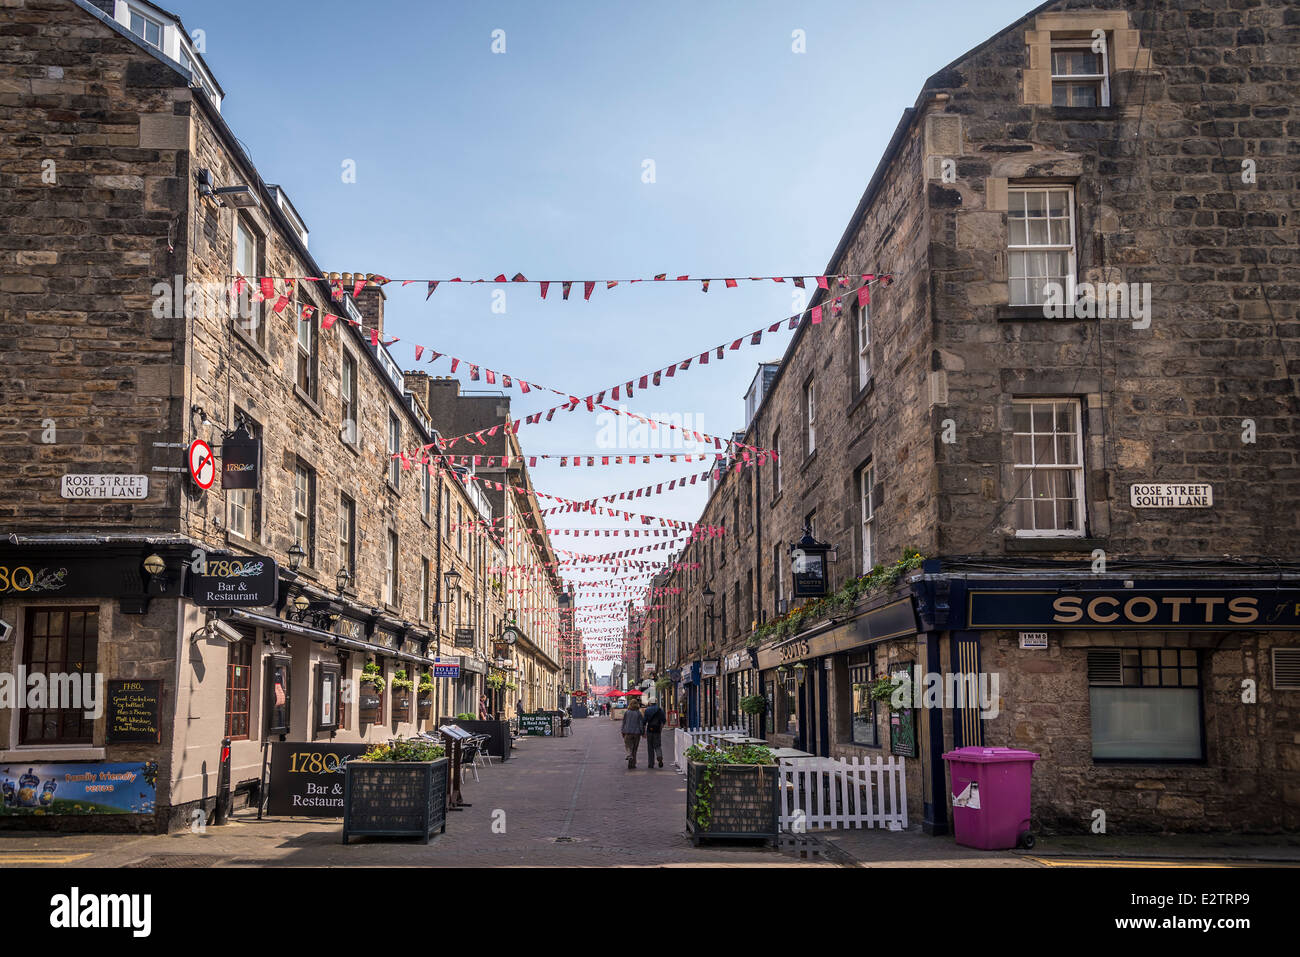 Rose street Edinburgh new town. The 1780 bar on the left and Scotts on the right. Stock Photo